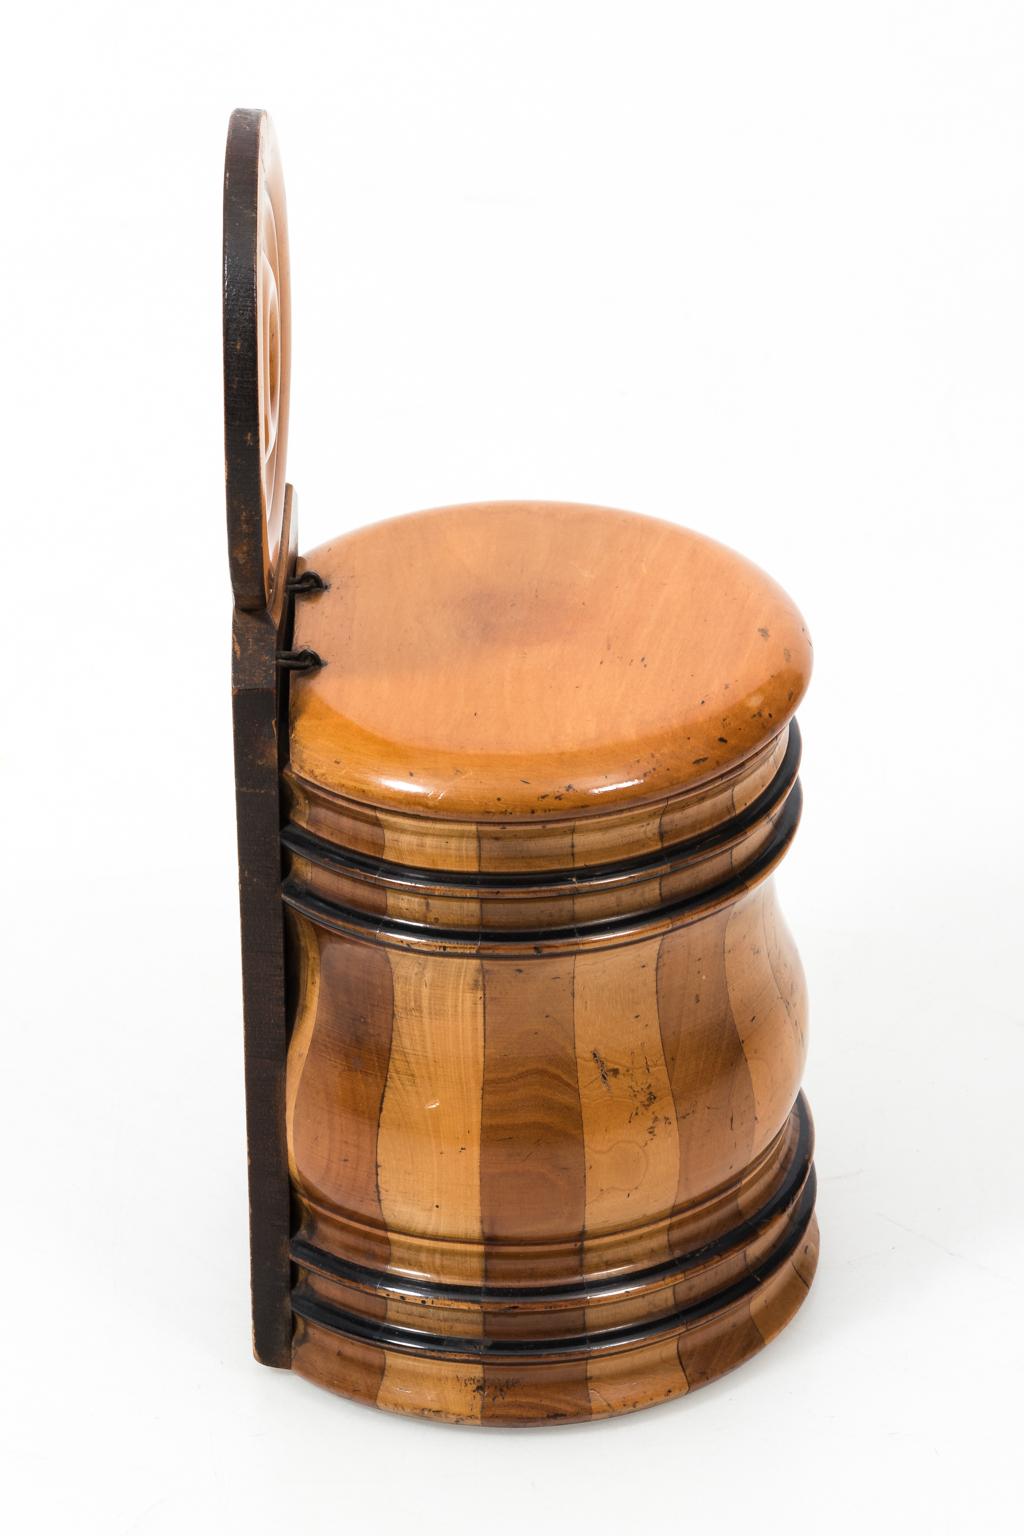 Scottish Treen salt box in Maplewood that can be wall-mounted or placed on a table. The box is also detailed with ring turnings, circa 1880s.
       